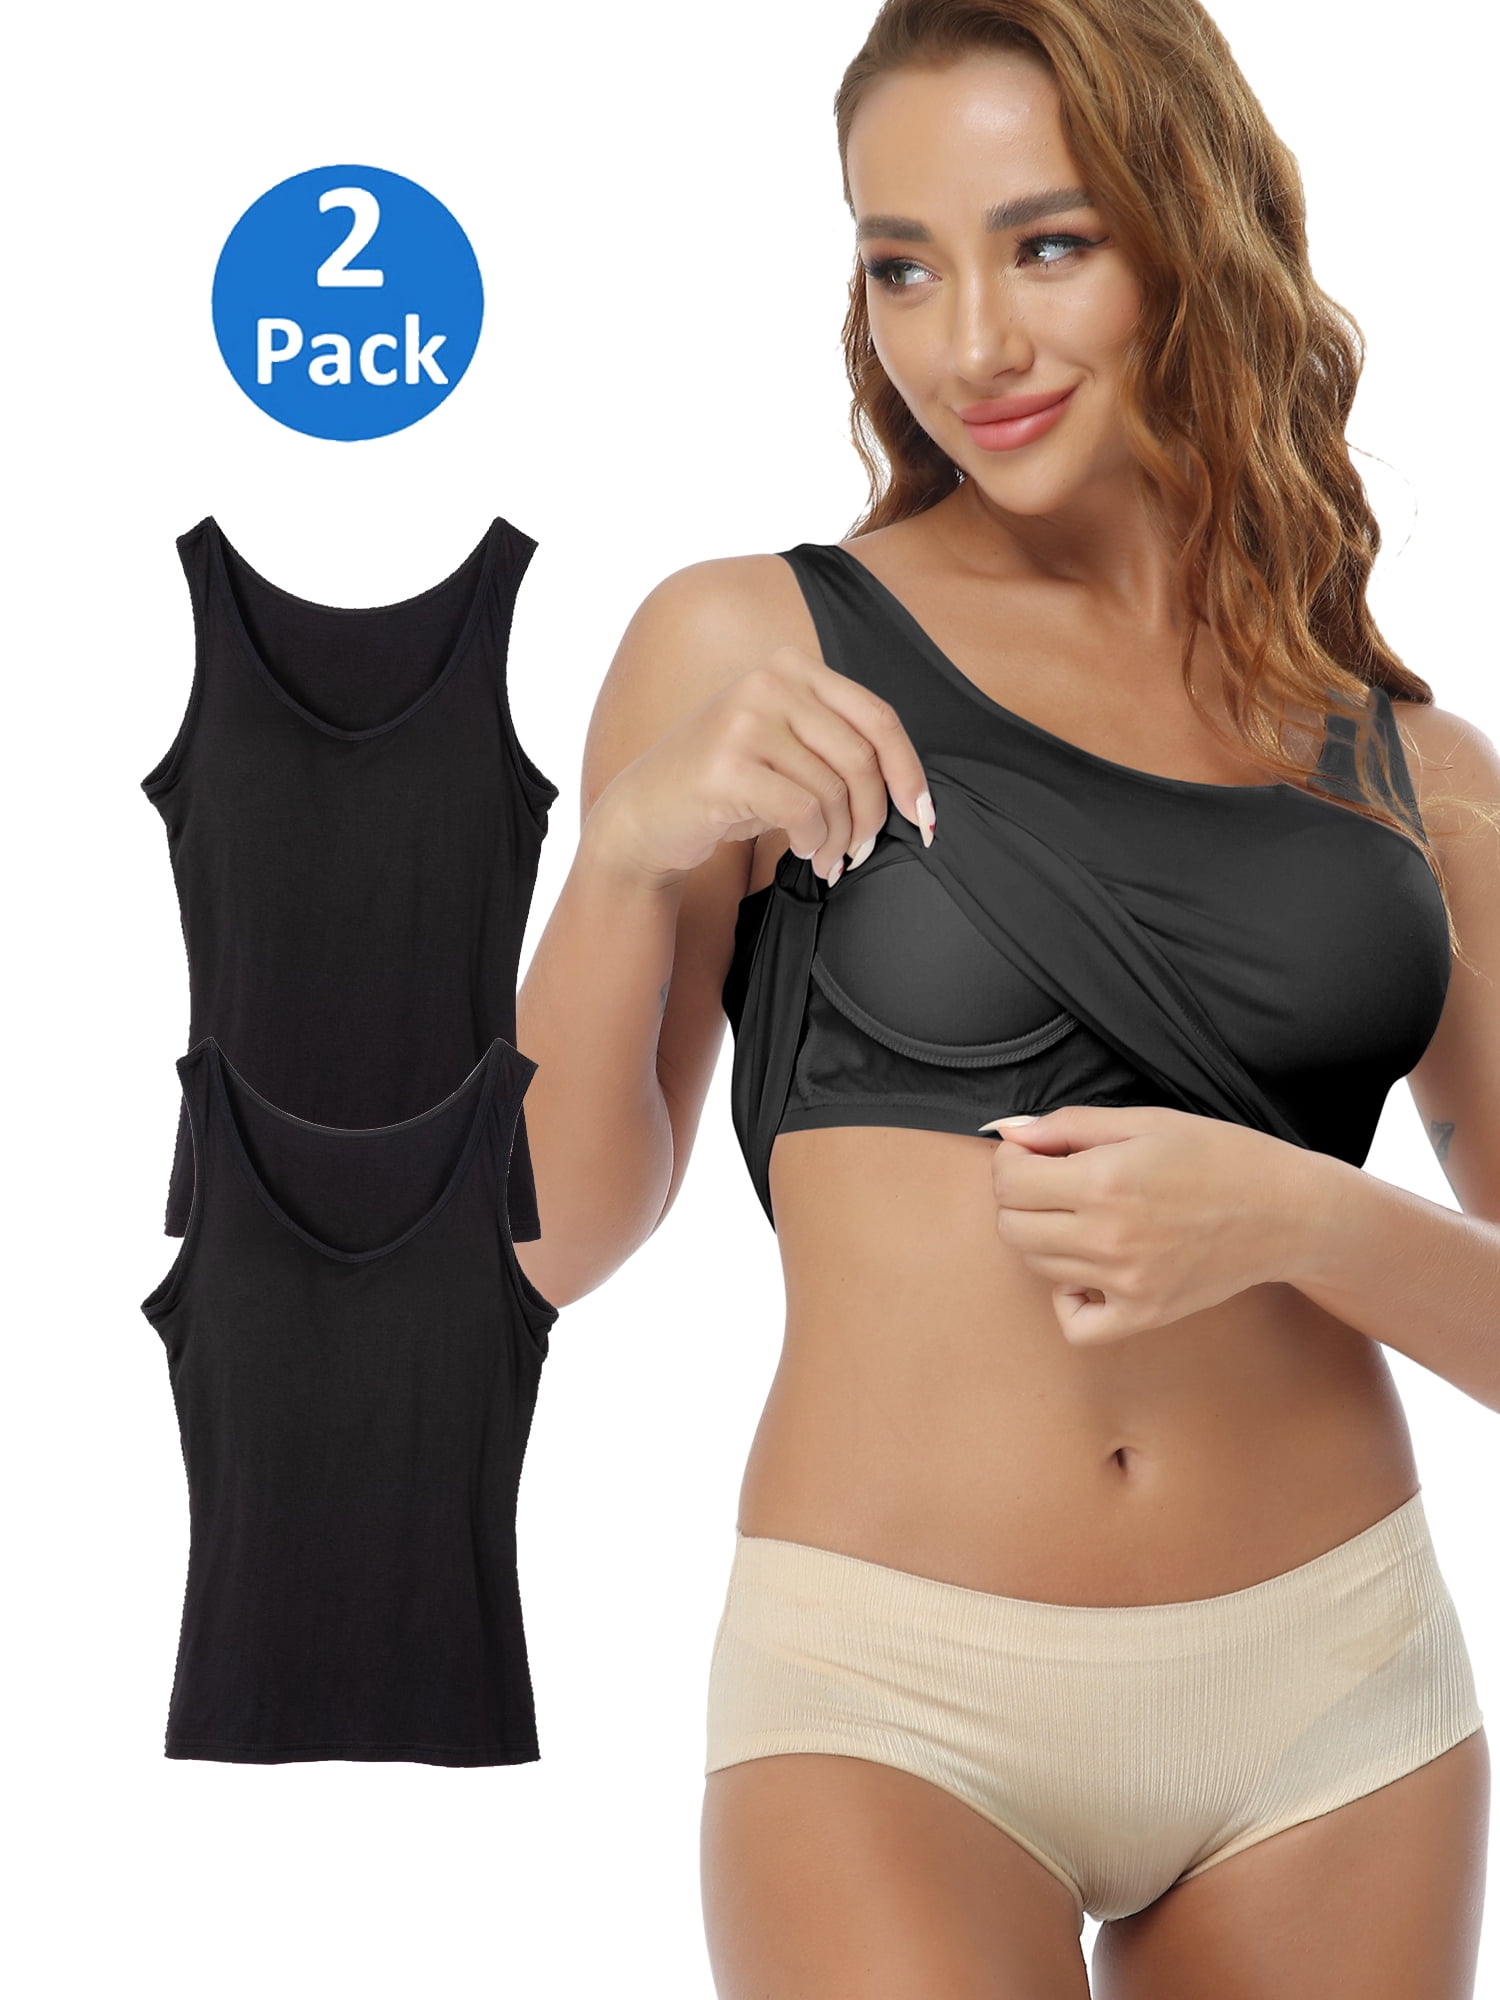 2 Pack Women's Camisole with Built in Bra Tank Tops for Layering Stretch Casual Undershirts Wider Strap Walmart.com